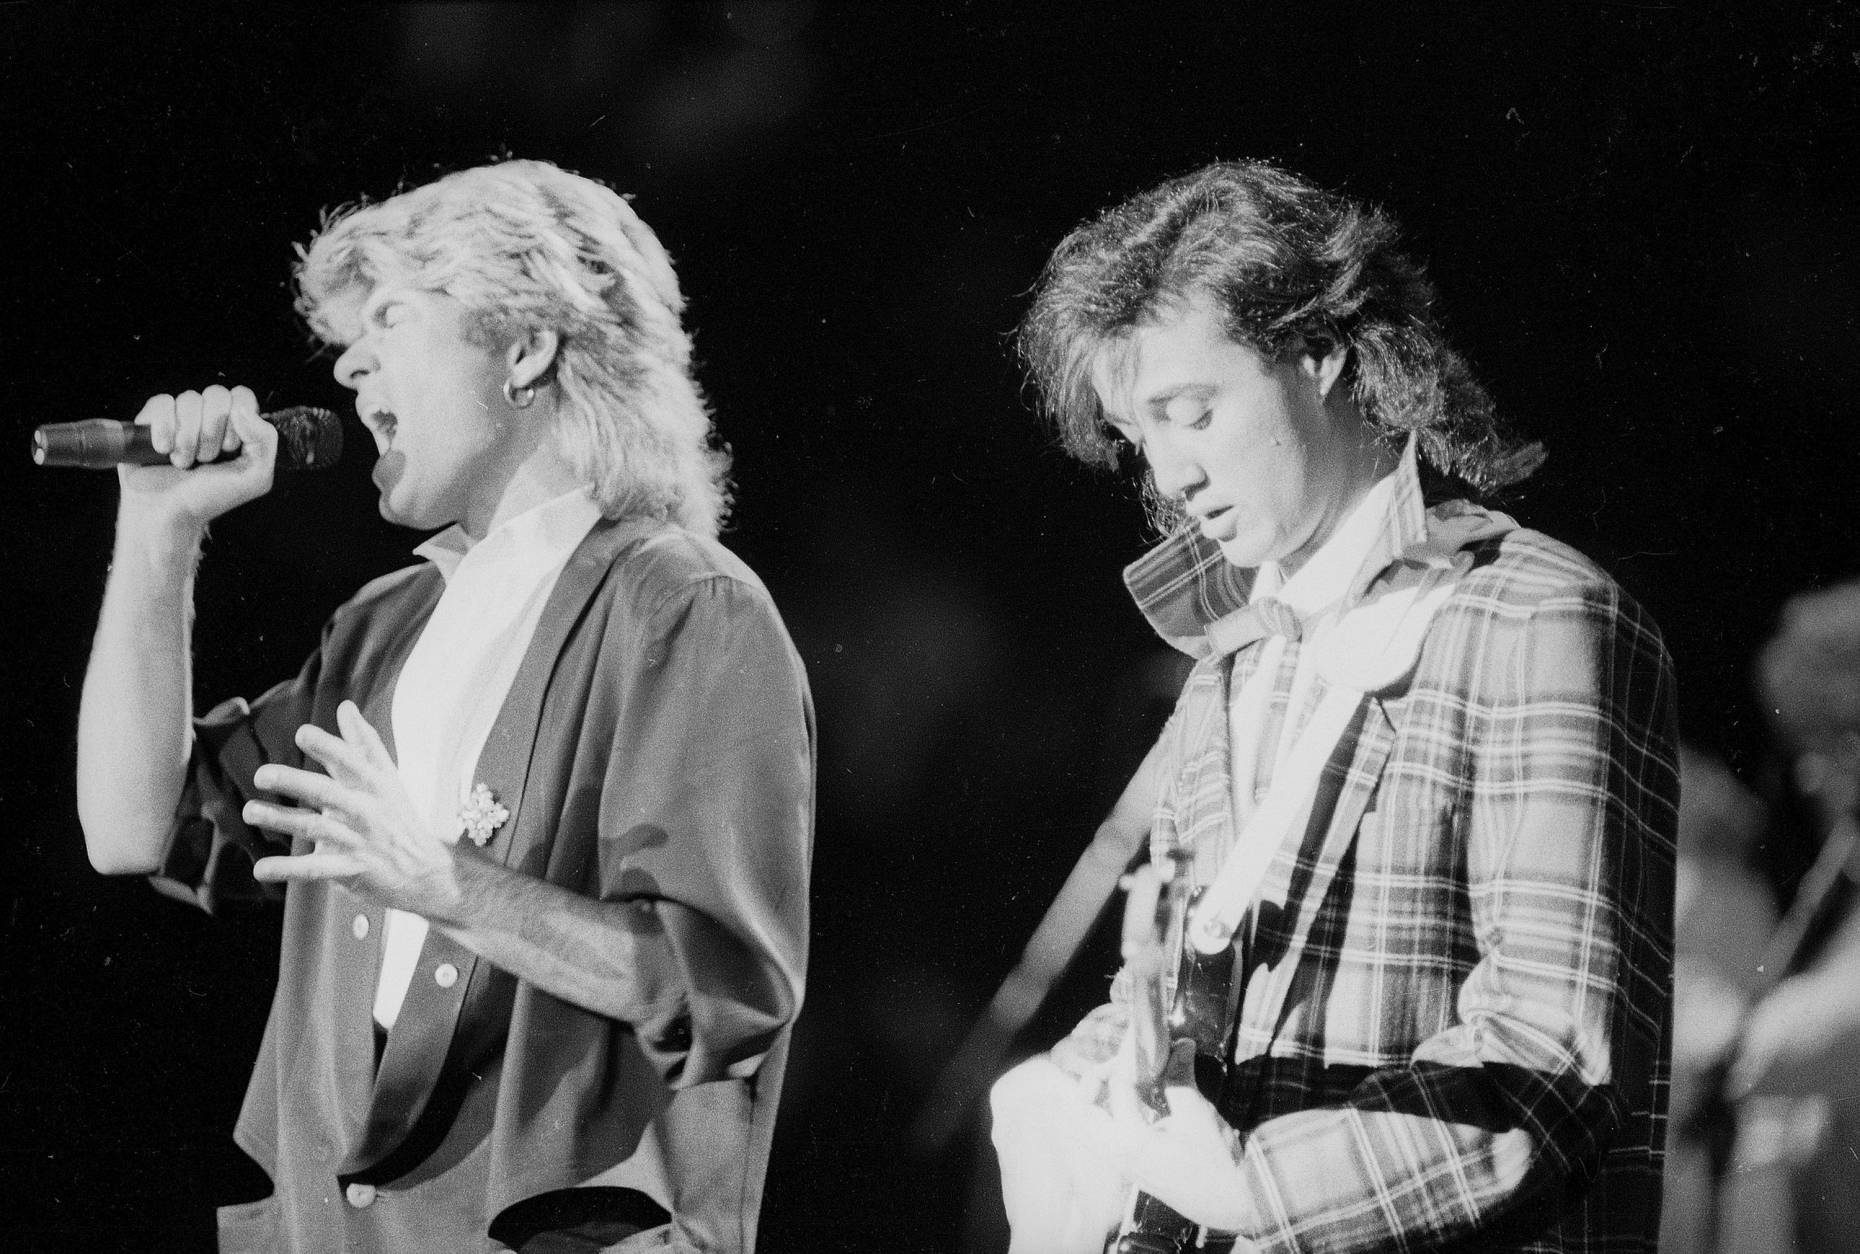 ** ARCHIV ** George Michael, links, und Andrew Ridgeley treten am 7. April 1985 als Wham! in Peking auf. Mit "Last Christmas" veroeffentlichte George Michael 1984 den ultimativen Popsong zum Weihnachtsfest. (AP Photo/Neal Ulevich) ** NUR S/W ** zu unserem KORR ** ** FILE **  The pop duo Wham! performs in Peking before a capacity audience of Chinese and foreign fans, April 7, 1985. Singers George Michael, left, and Andrew Ridgeley, had youthful fans on their feet despite police warnings to sit down. (AP Photo/Neal Ulevich)  ** B/W ONLY **